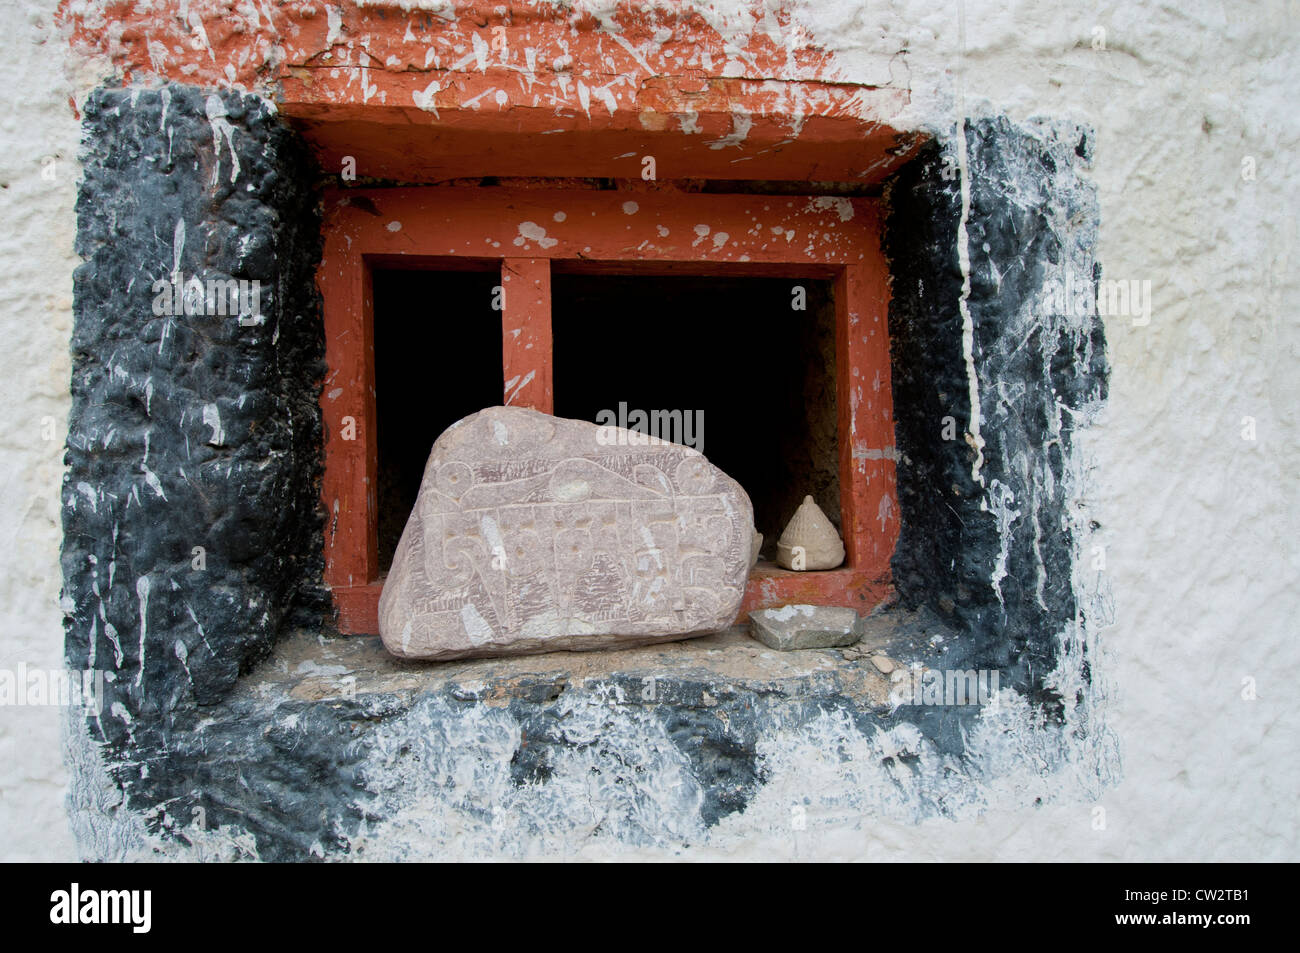 Large and small carved prayer stones on the ledge of a red wooden framed window at Lamayuru Monastery in Ladakh, India Stock Photo